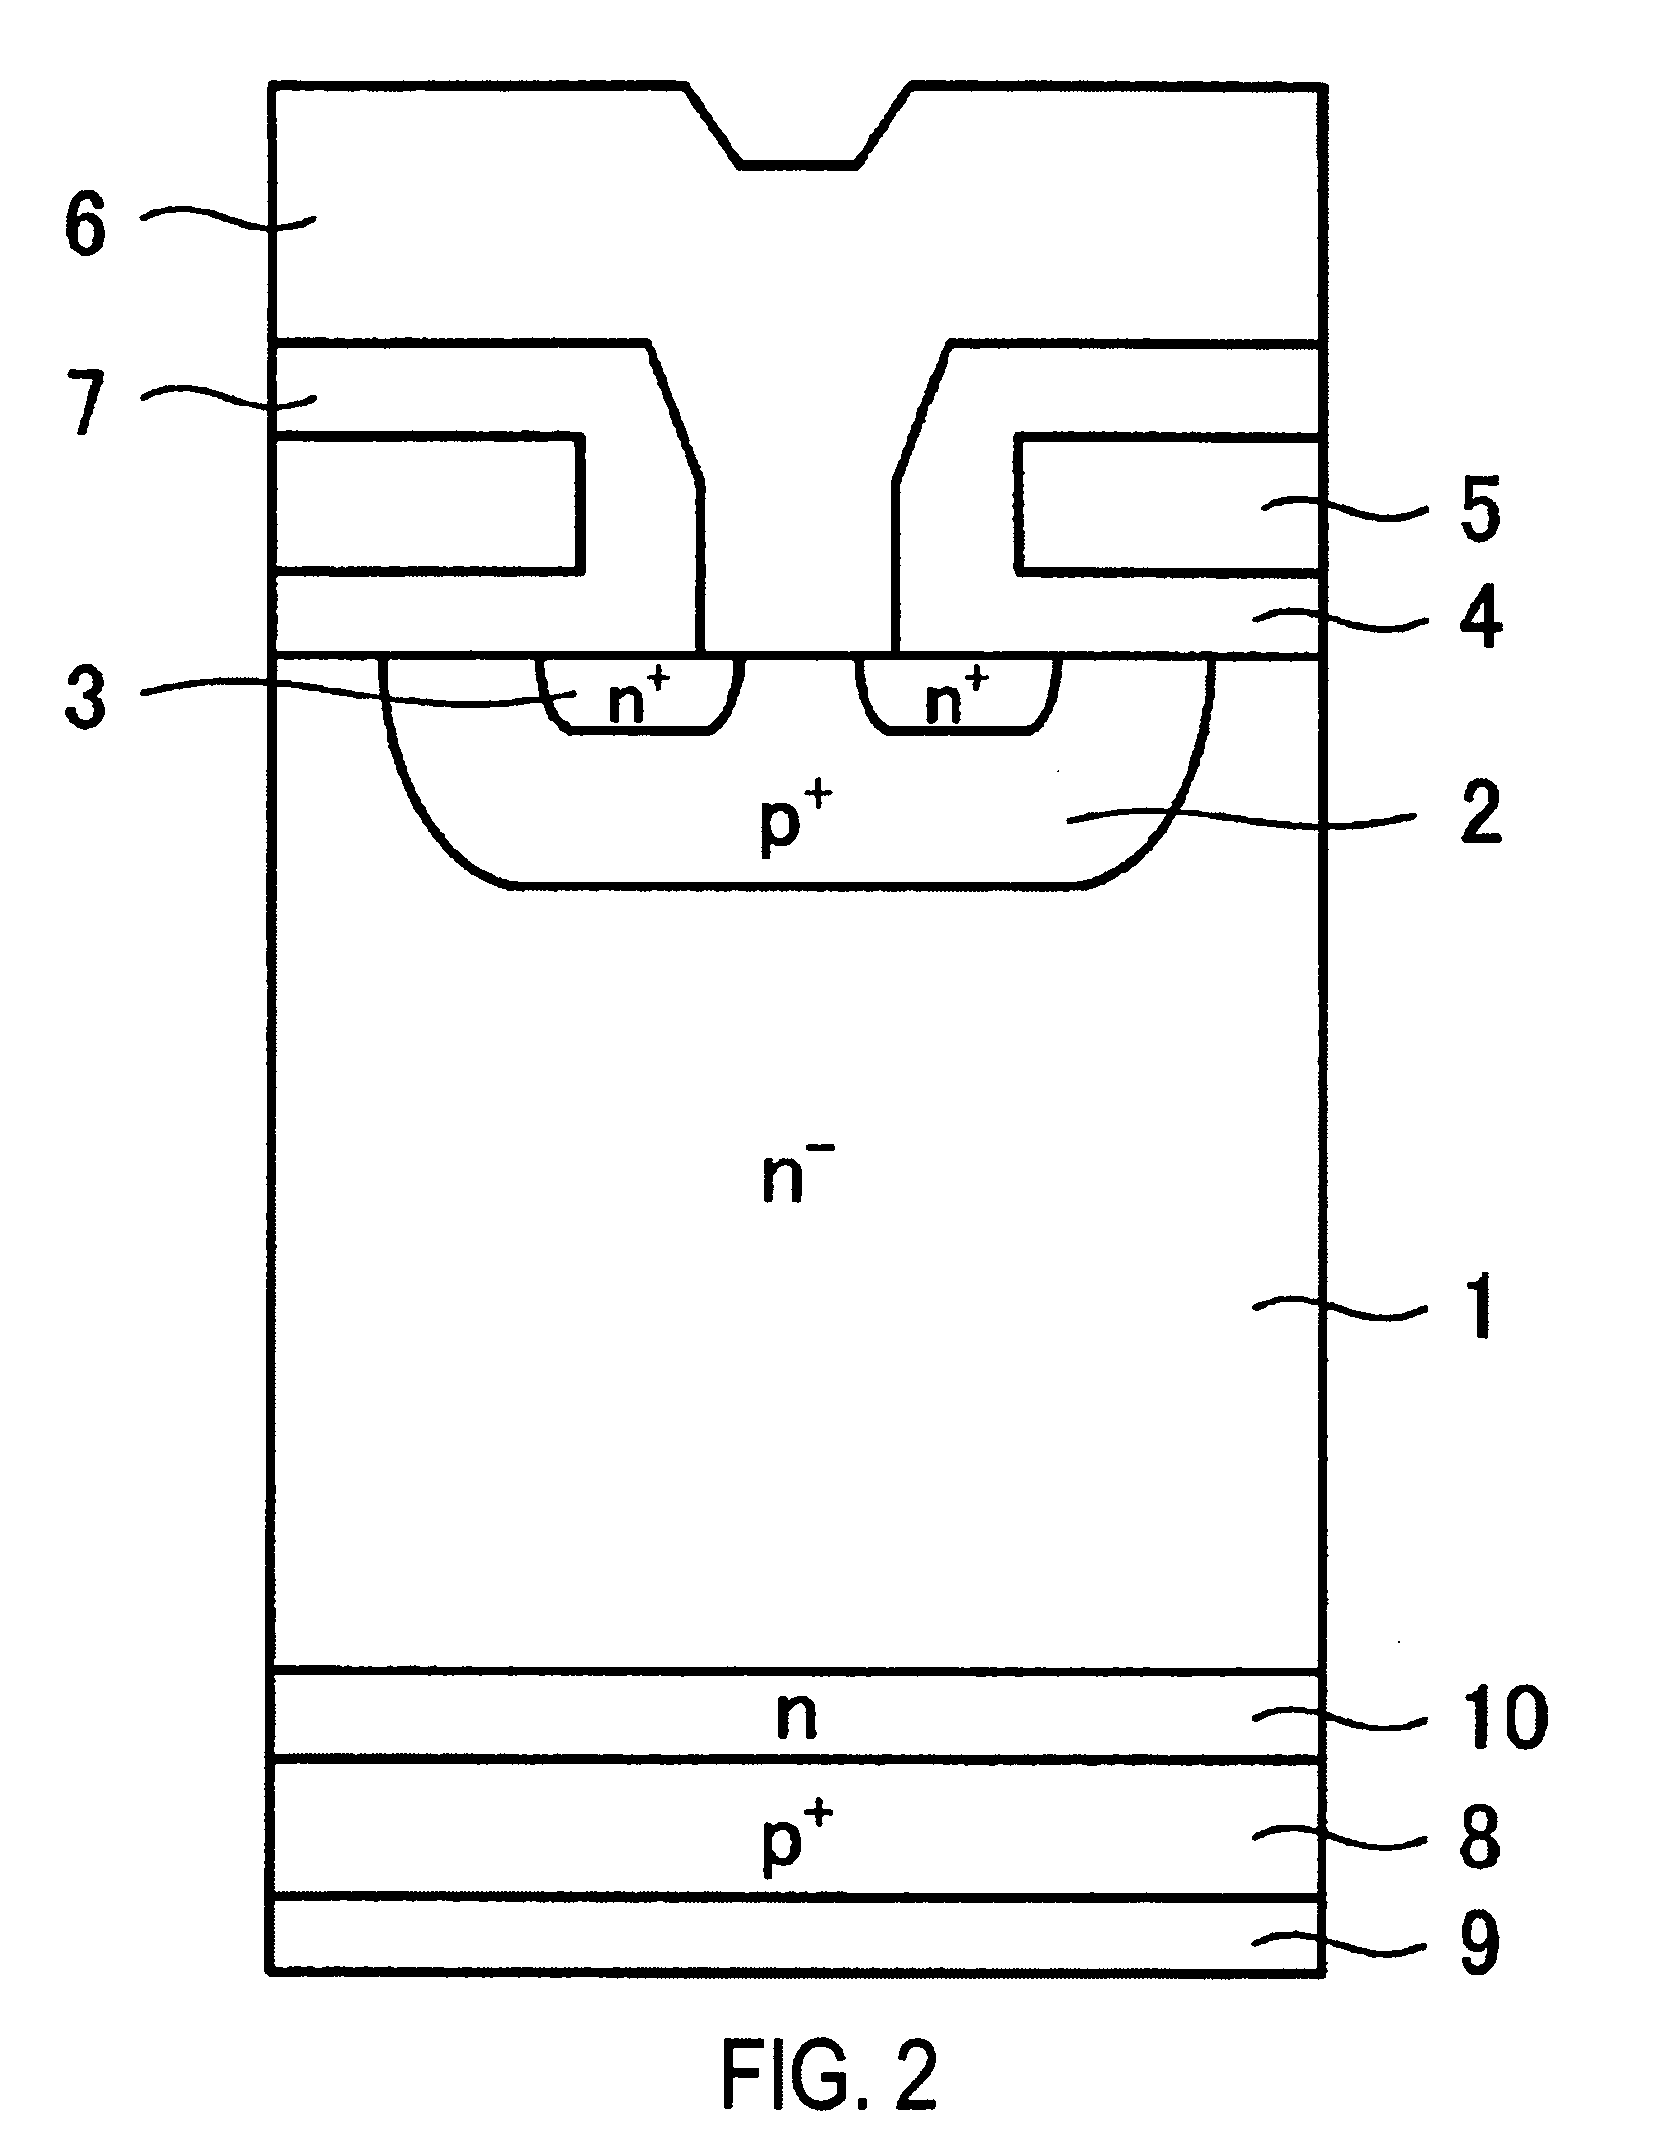 Method of producing a semiconductor device with an aluminum or aluminum alloy electrode